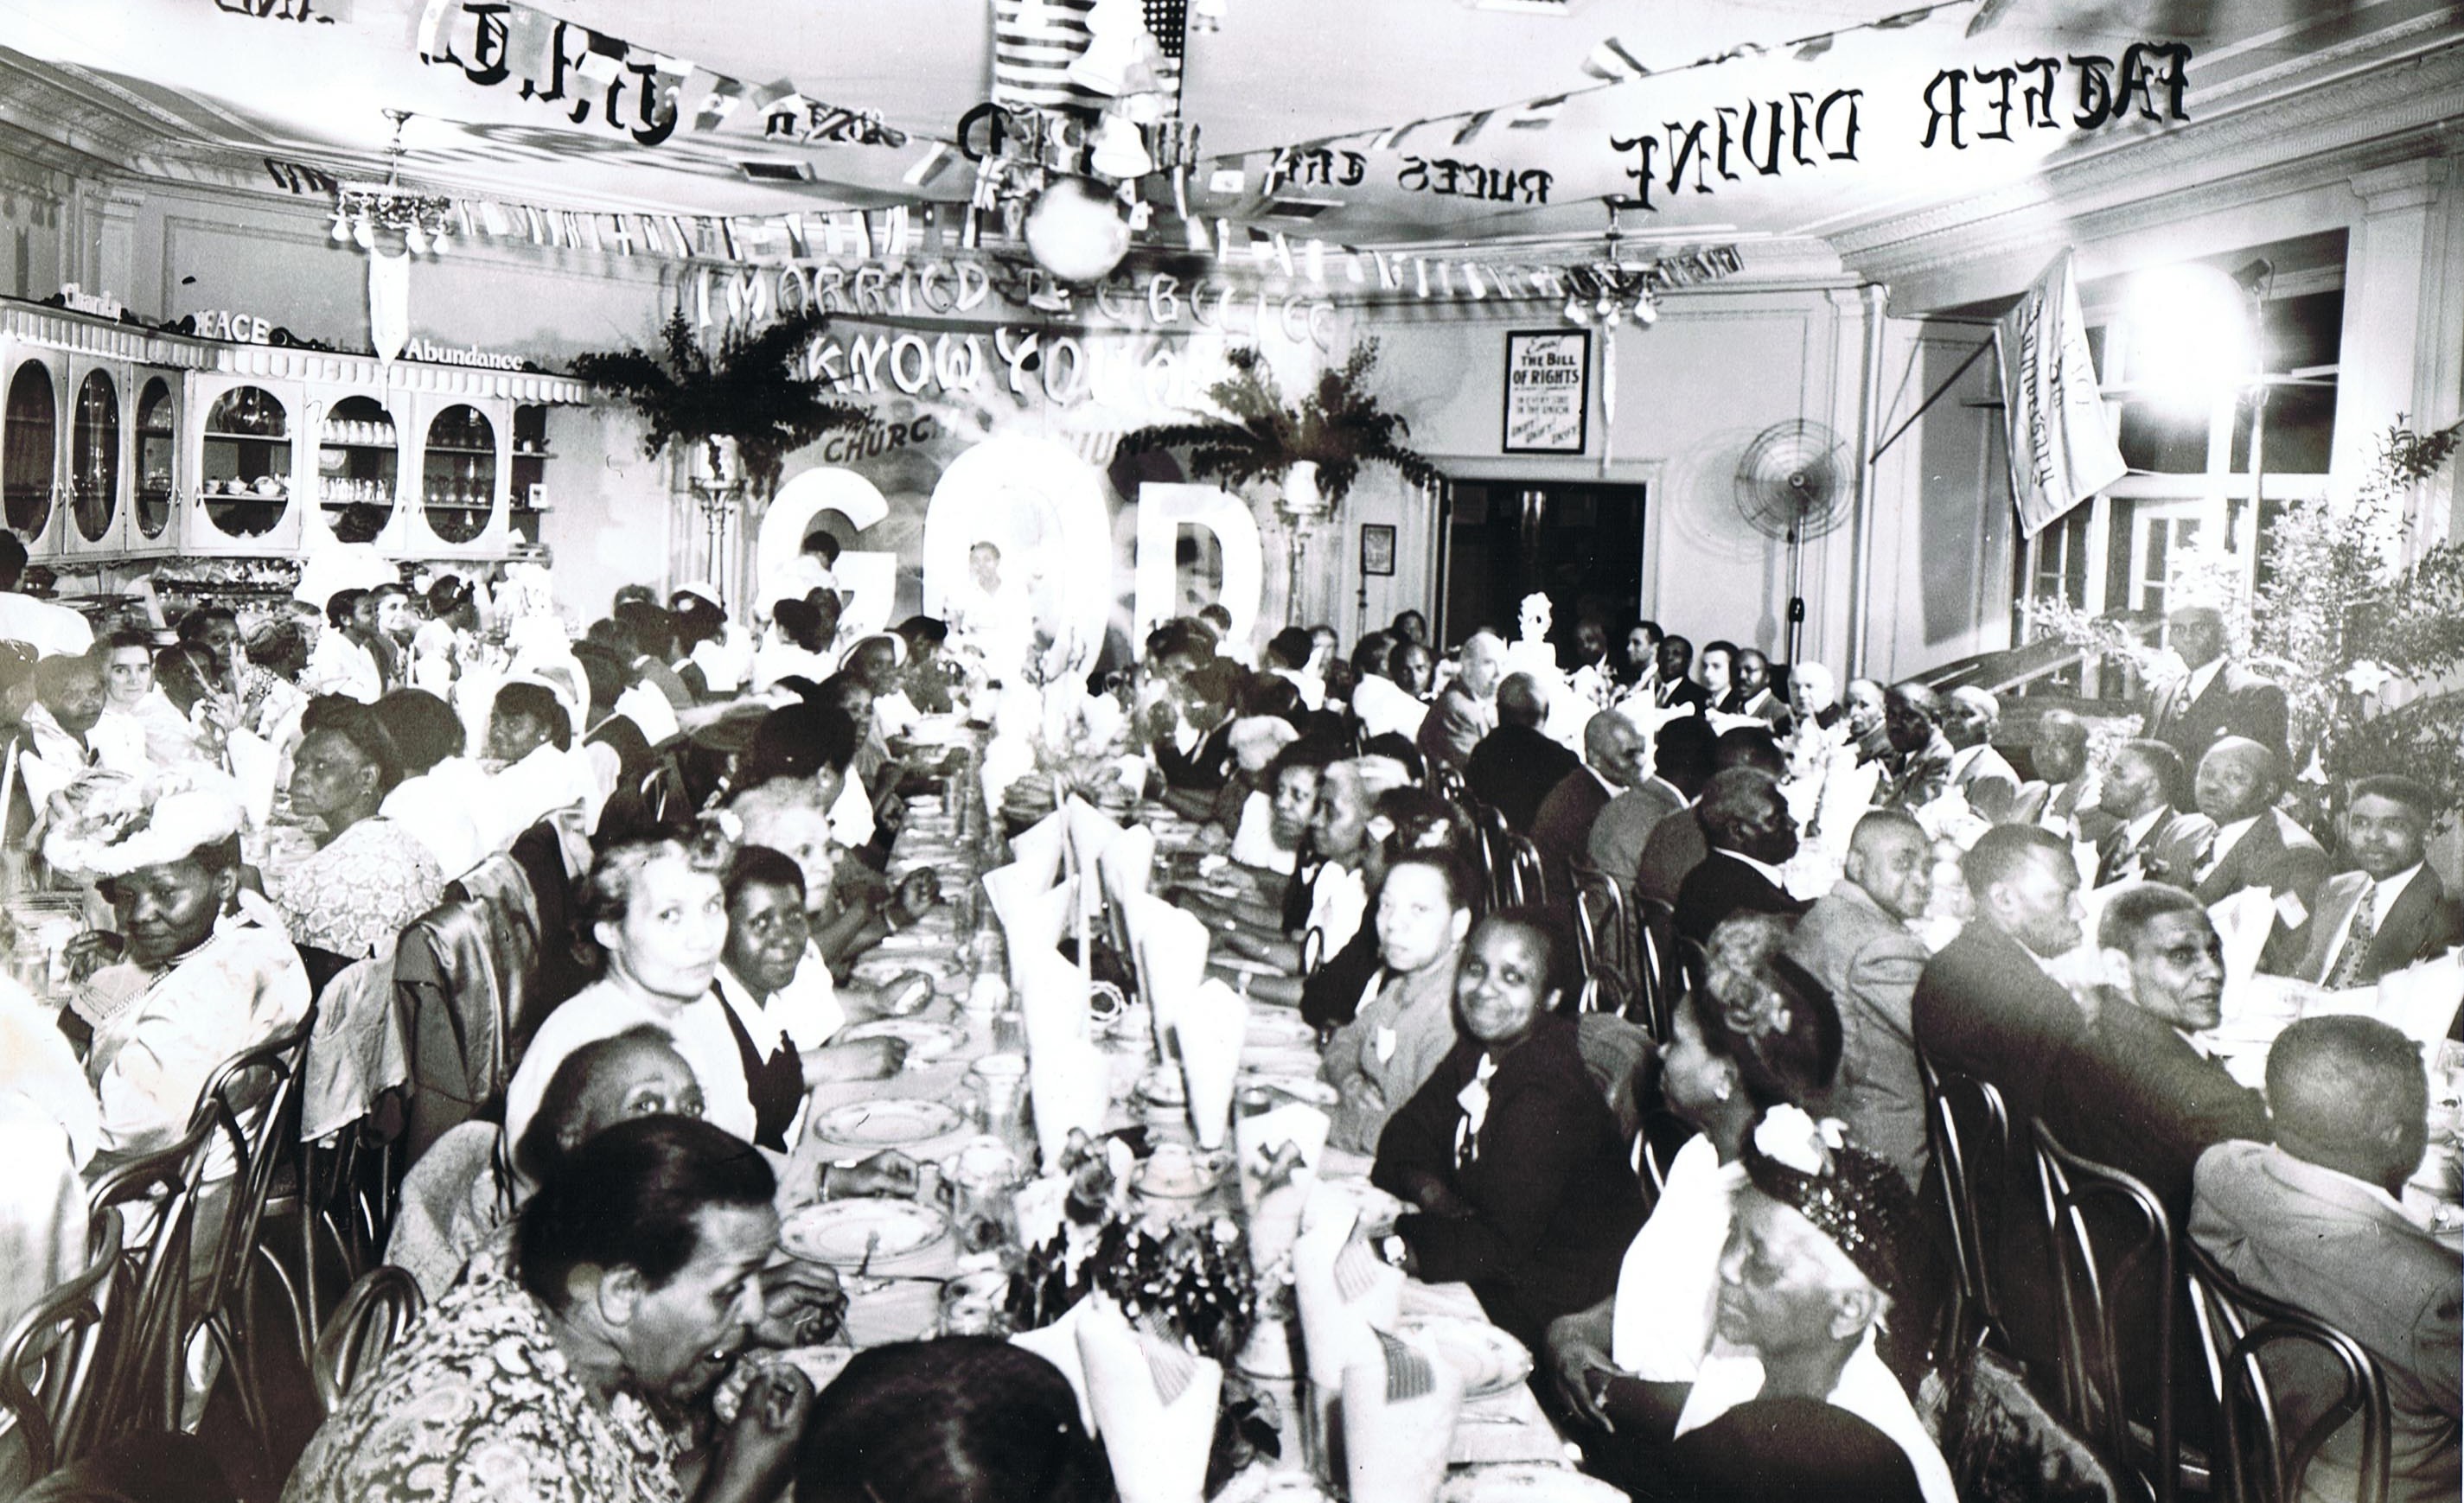 Followers and guests dining at The Divine Riviera Hotel, Newark, N.J.